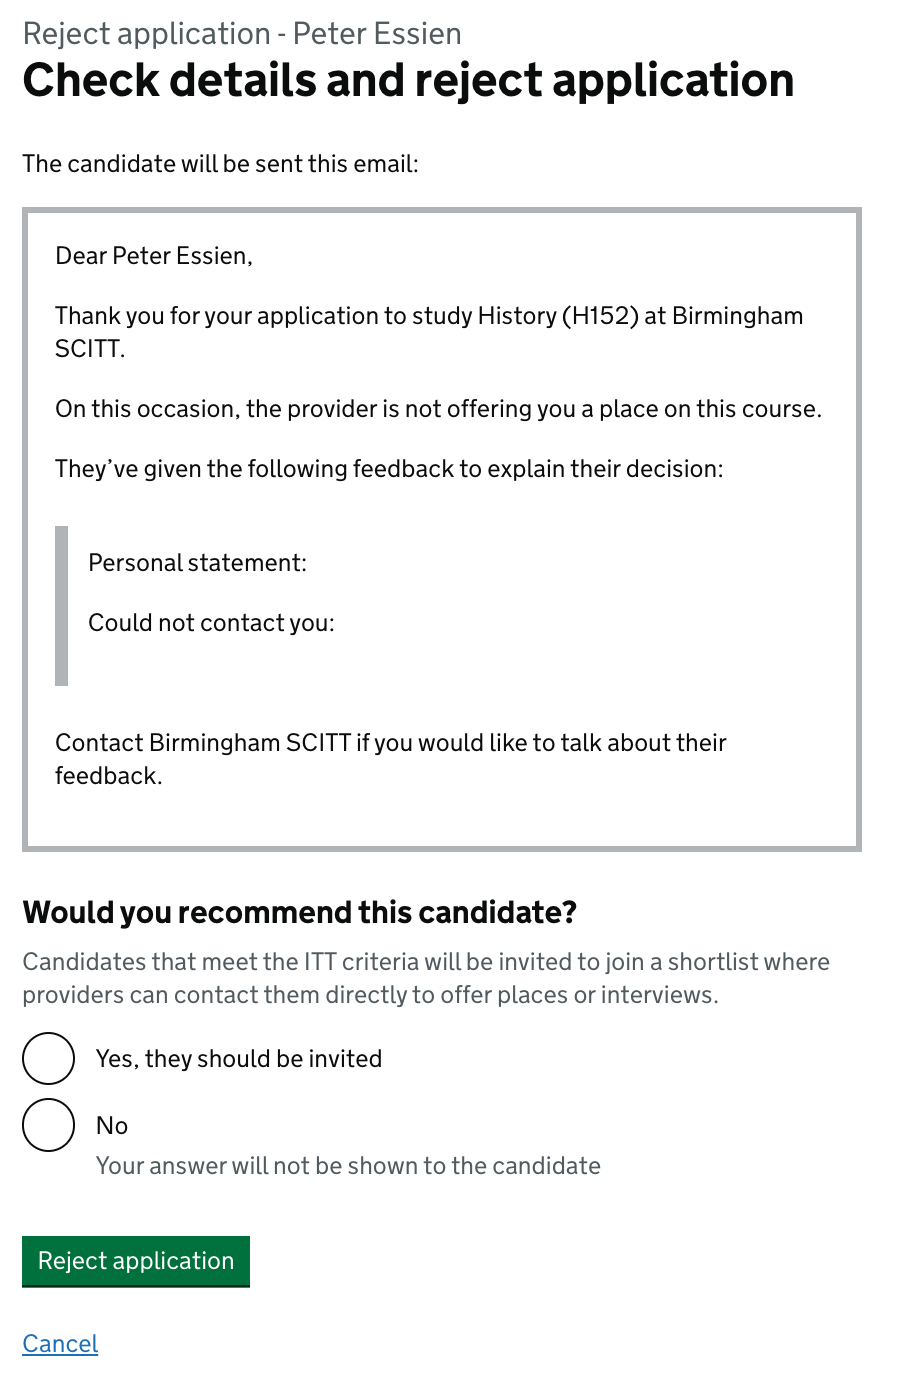 Screenshot showing a page with the heading 'Check details and reject application'. Beneath this is a preview of the email the candidate will be sent to show why they were rejected. Beneath this is a question asking 'Would you recommend this candidate?'. The answers the user can select are, 'Yes, the should be invited' and 'No, your answer will not be shown to the candidate'. Beneath this is a green button that says 'Reject application'.